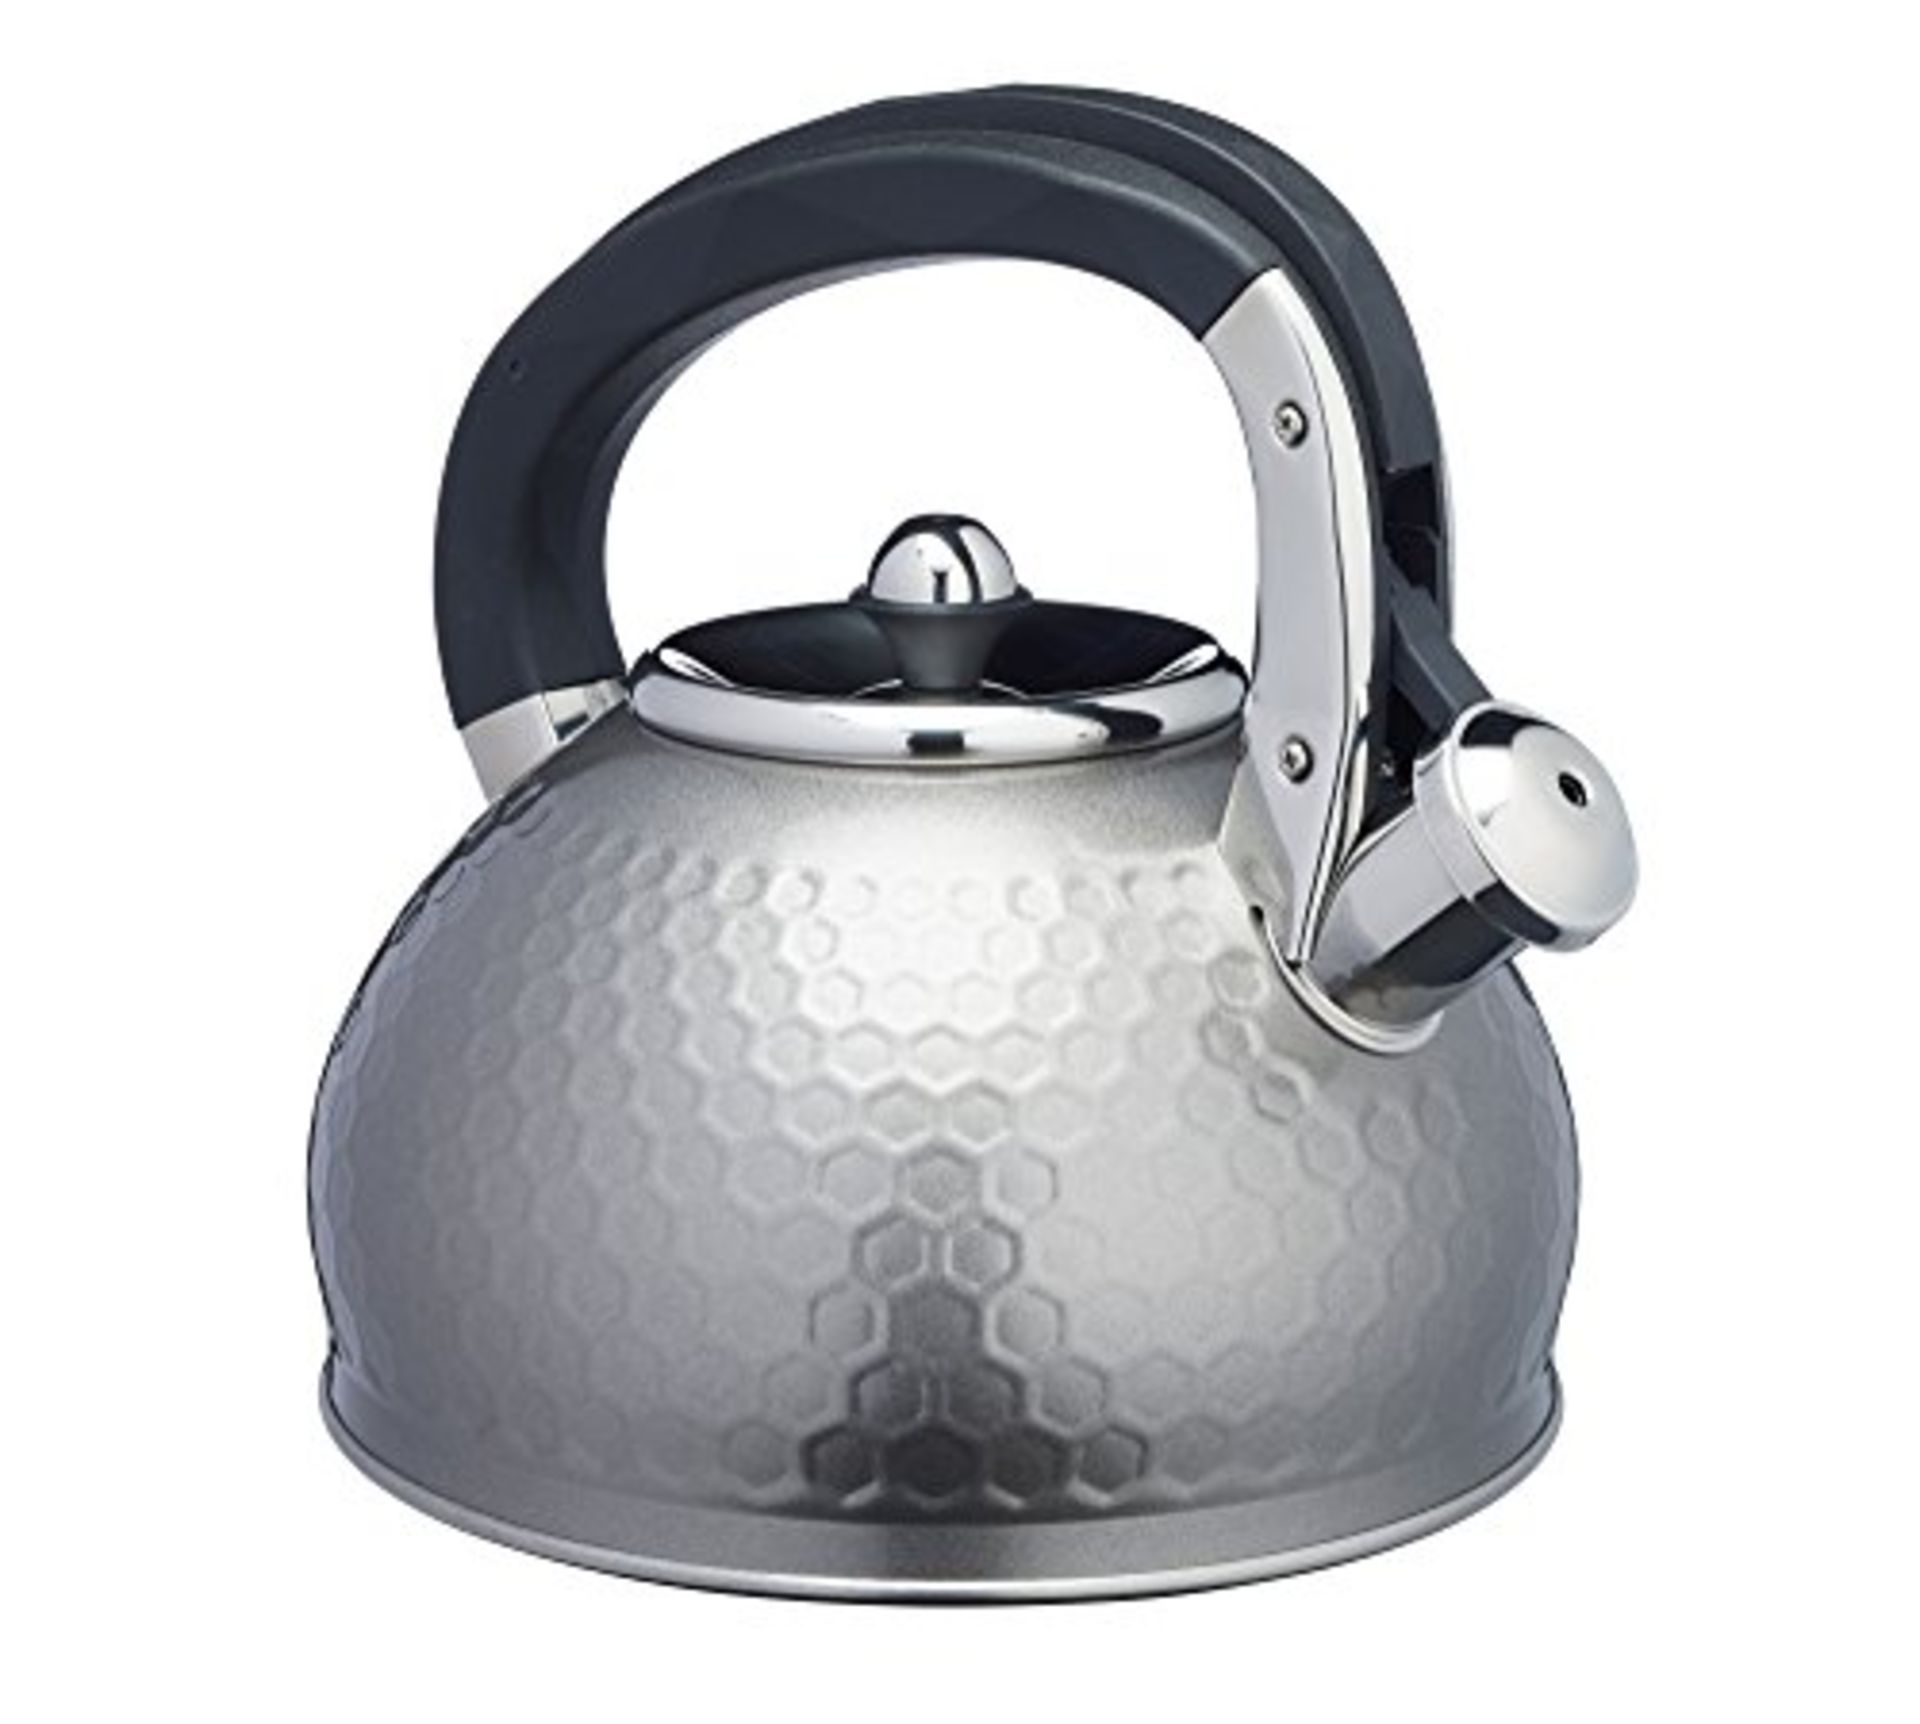 Kitchen Craft Lovello Induction Stovetop Whistling Kettle, Stainless Steel, Grey, 2.5